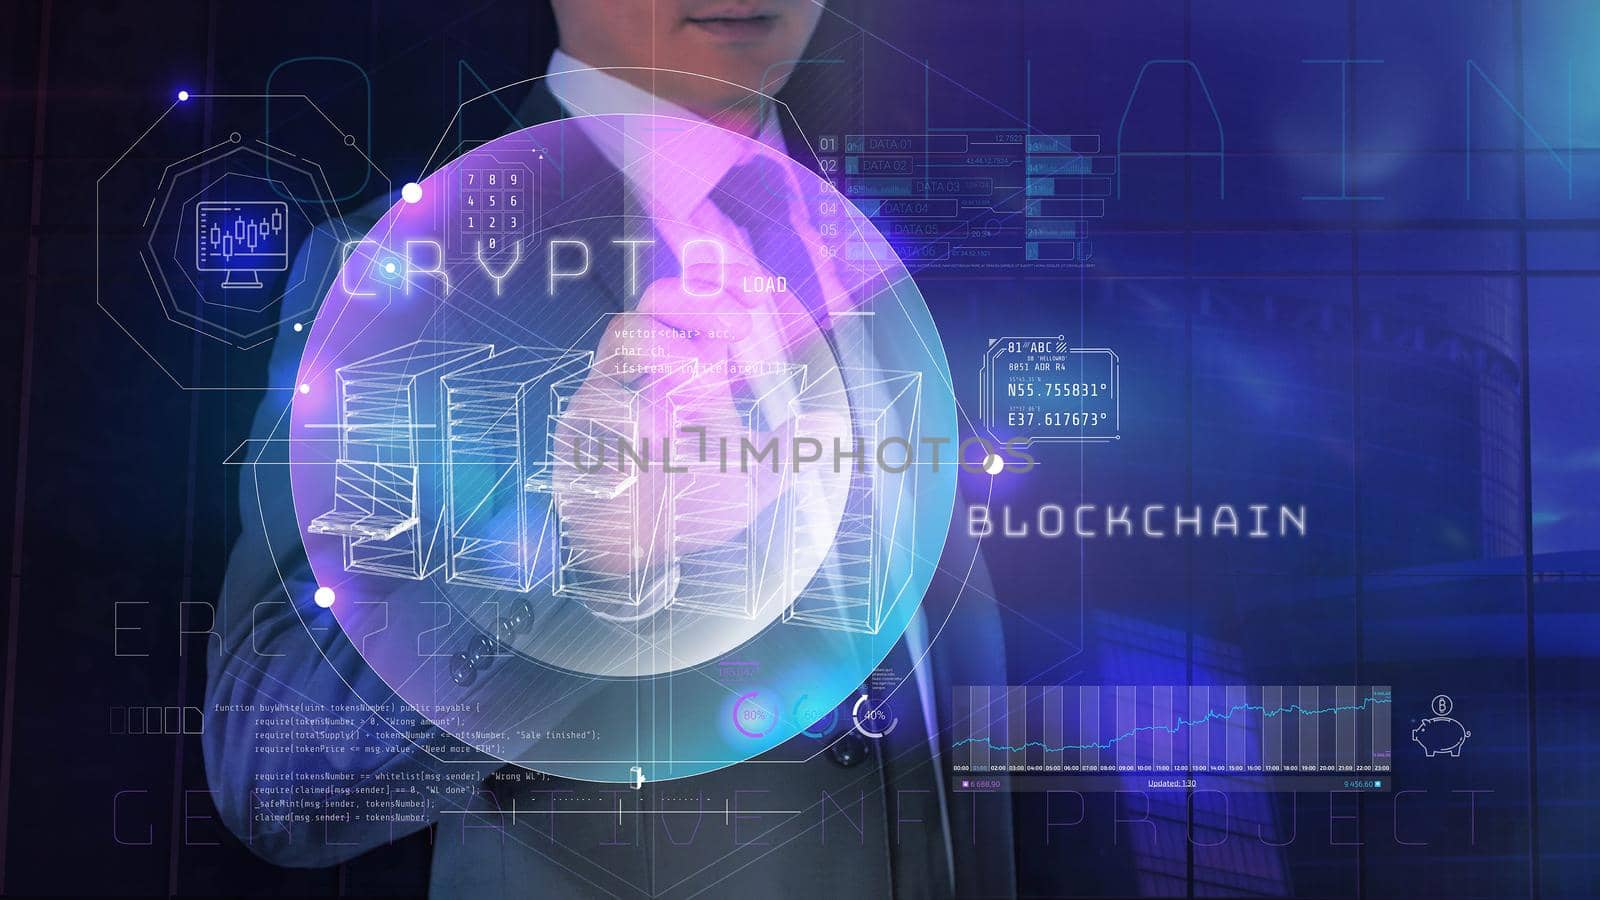 An employee of a brokerage firm fulfilling orders for the processing of cryptocurrency data on a holographic panel.